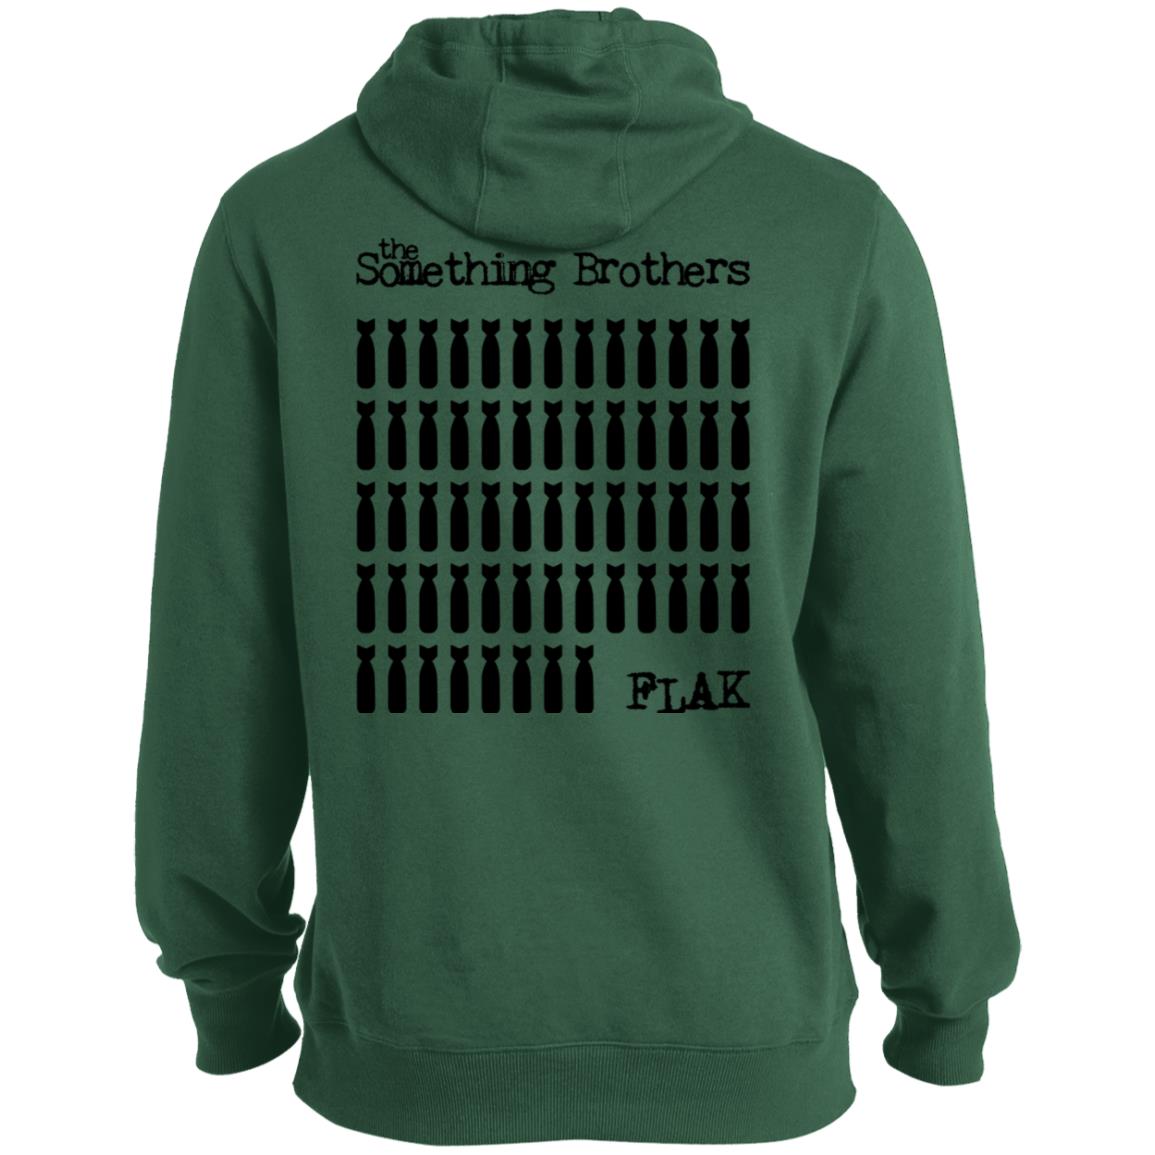 The Something Brothers "FLAK" Dual Design Front and Back Pullover Hoodie